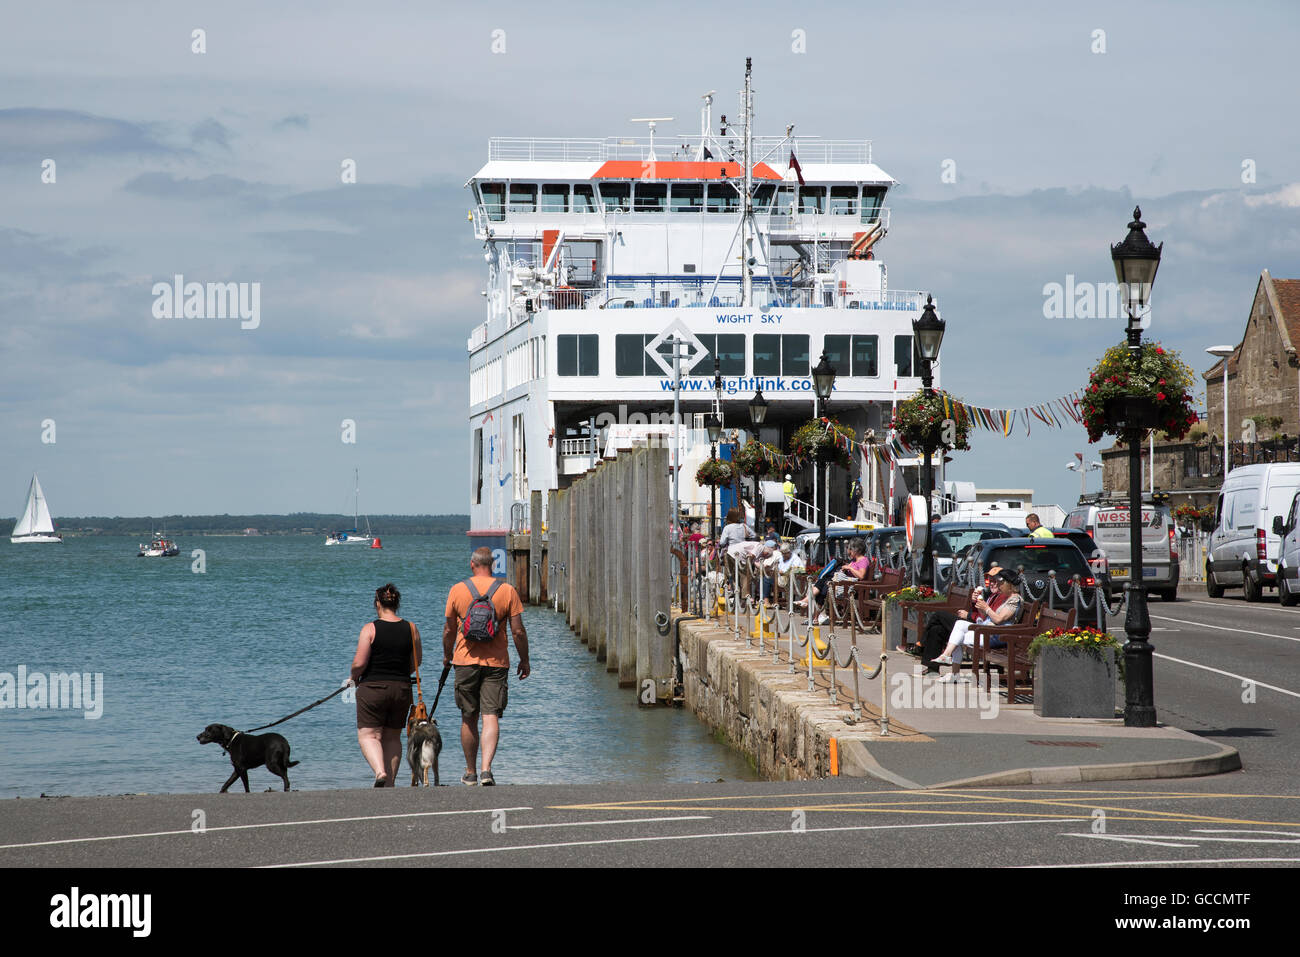 YARMOUTH HARBOUR ISLE OF WIGHT  A roll on roll off ferry berthed on the waterfront and passengers walk their pet dogs Stock Photo